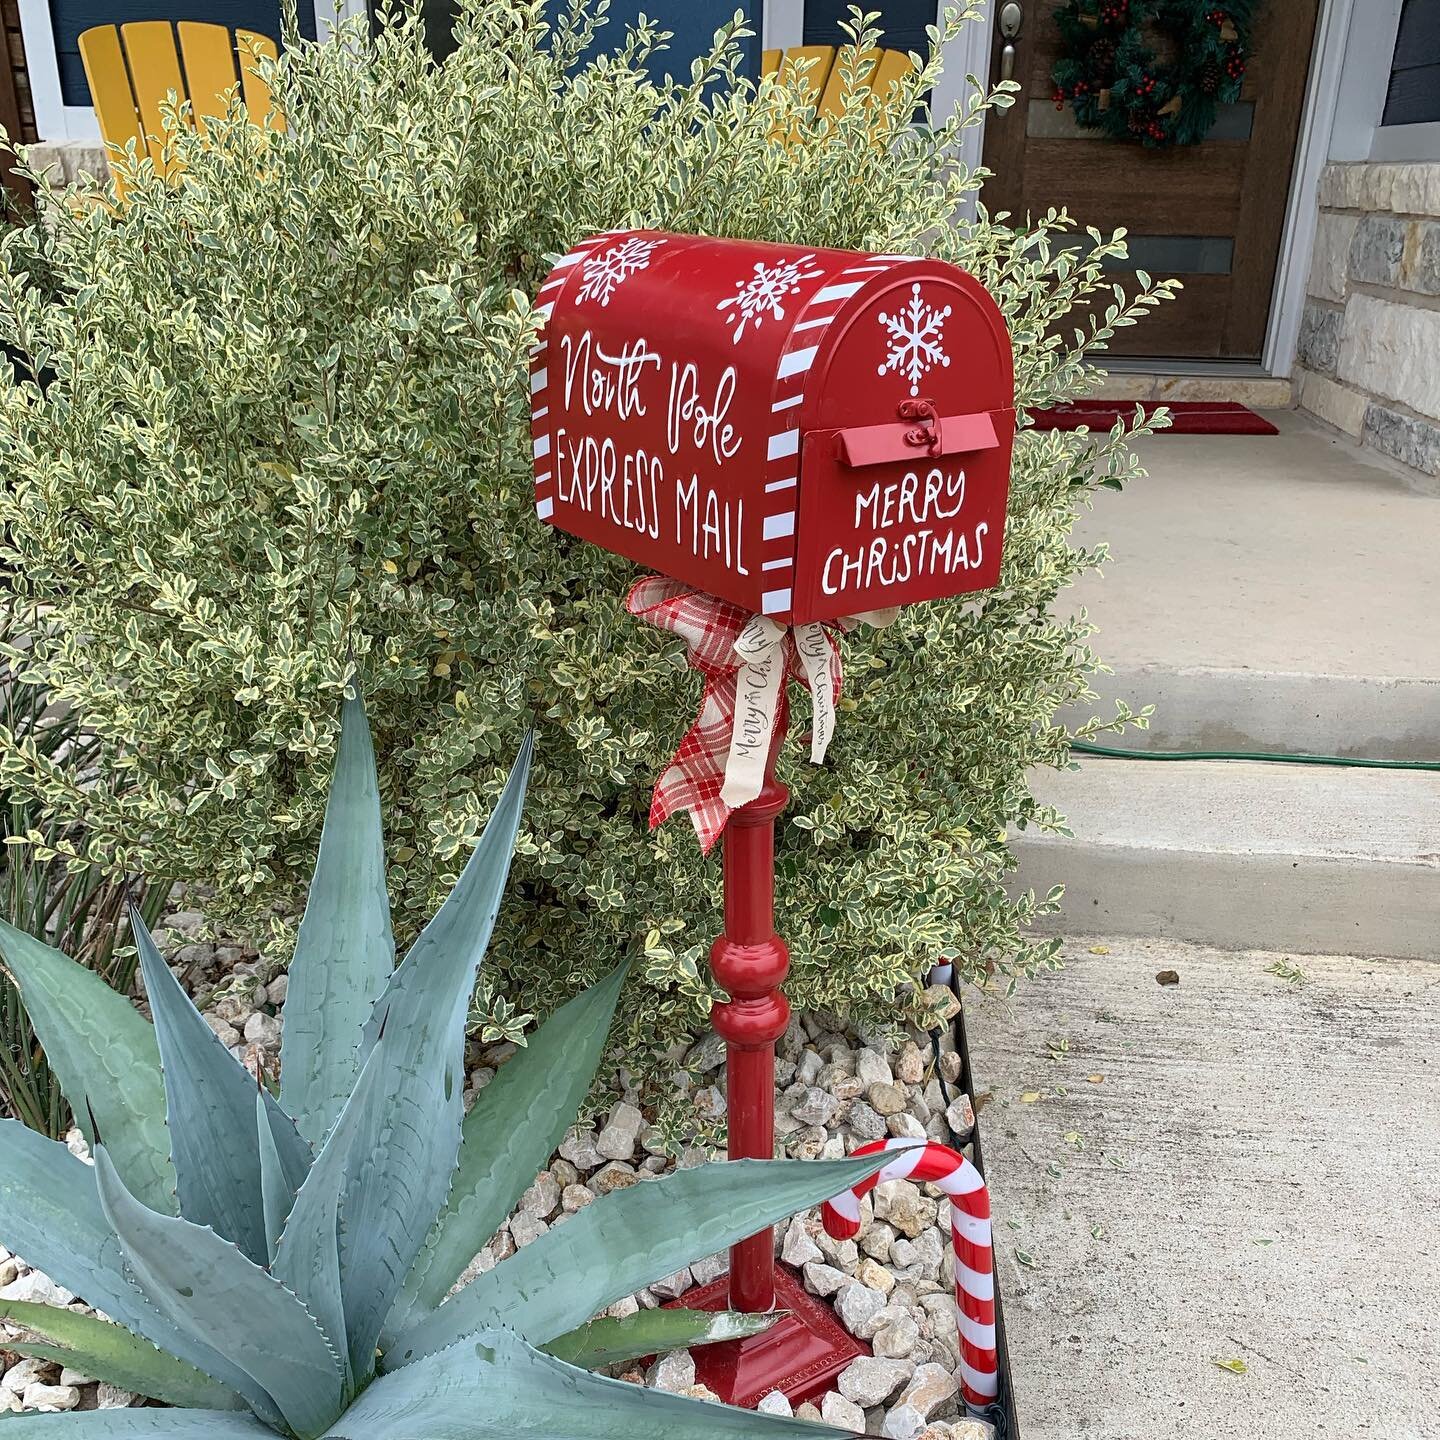 I finally got to add my North Pole Express mailbox with direct access to Santa! Now our neighborhood little(s) can walk the candy cane lane, drop their letter to Santa in the slot on the front and get a response straight from the North Pole 🤗 Have a